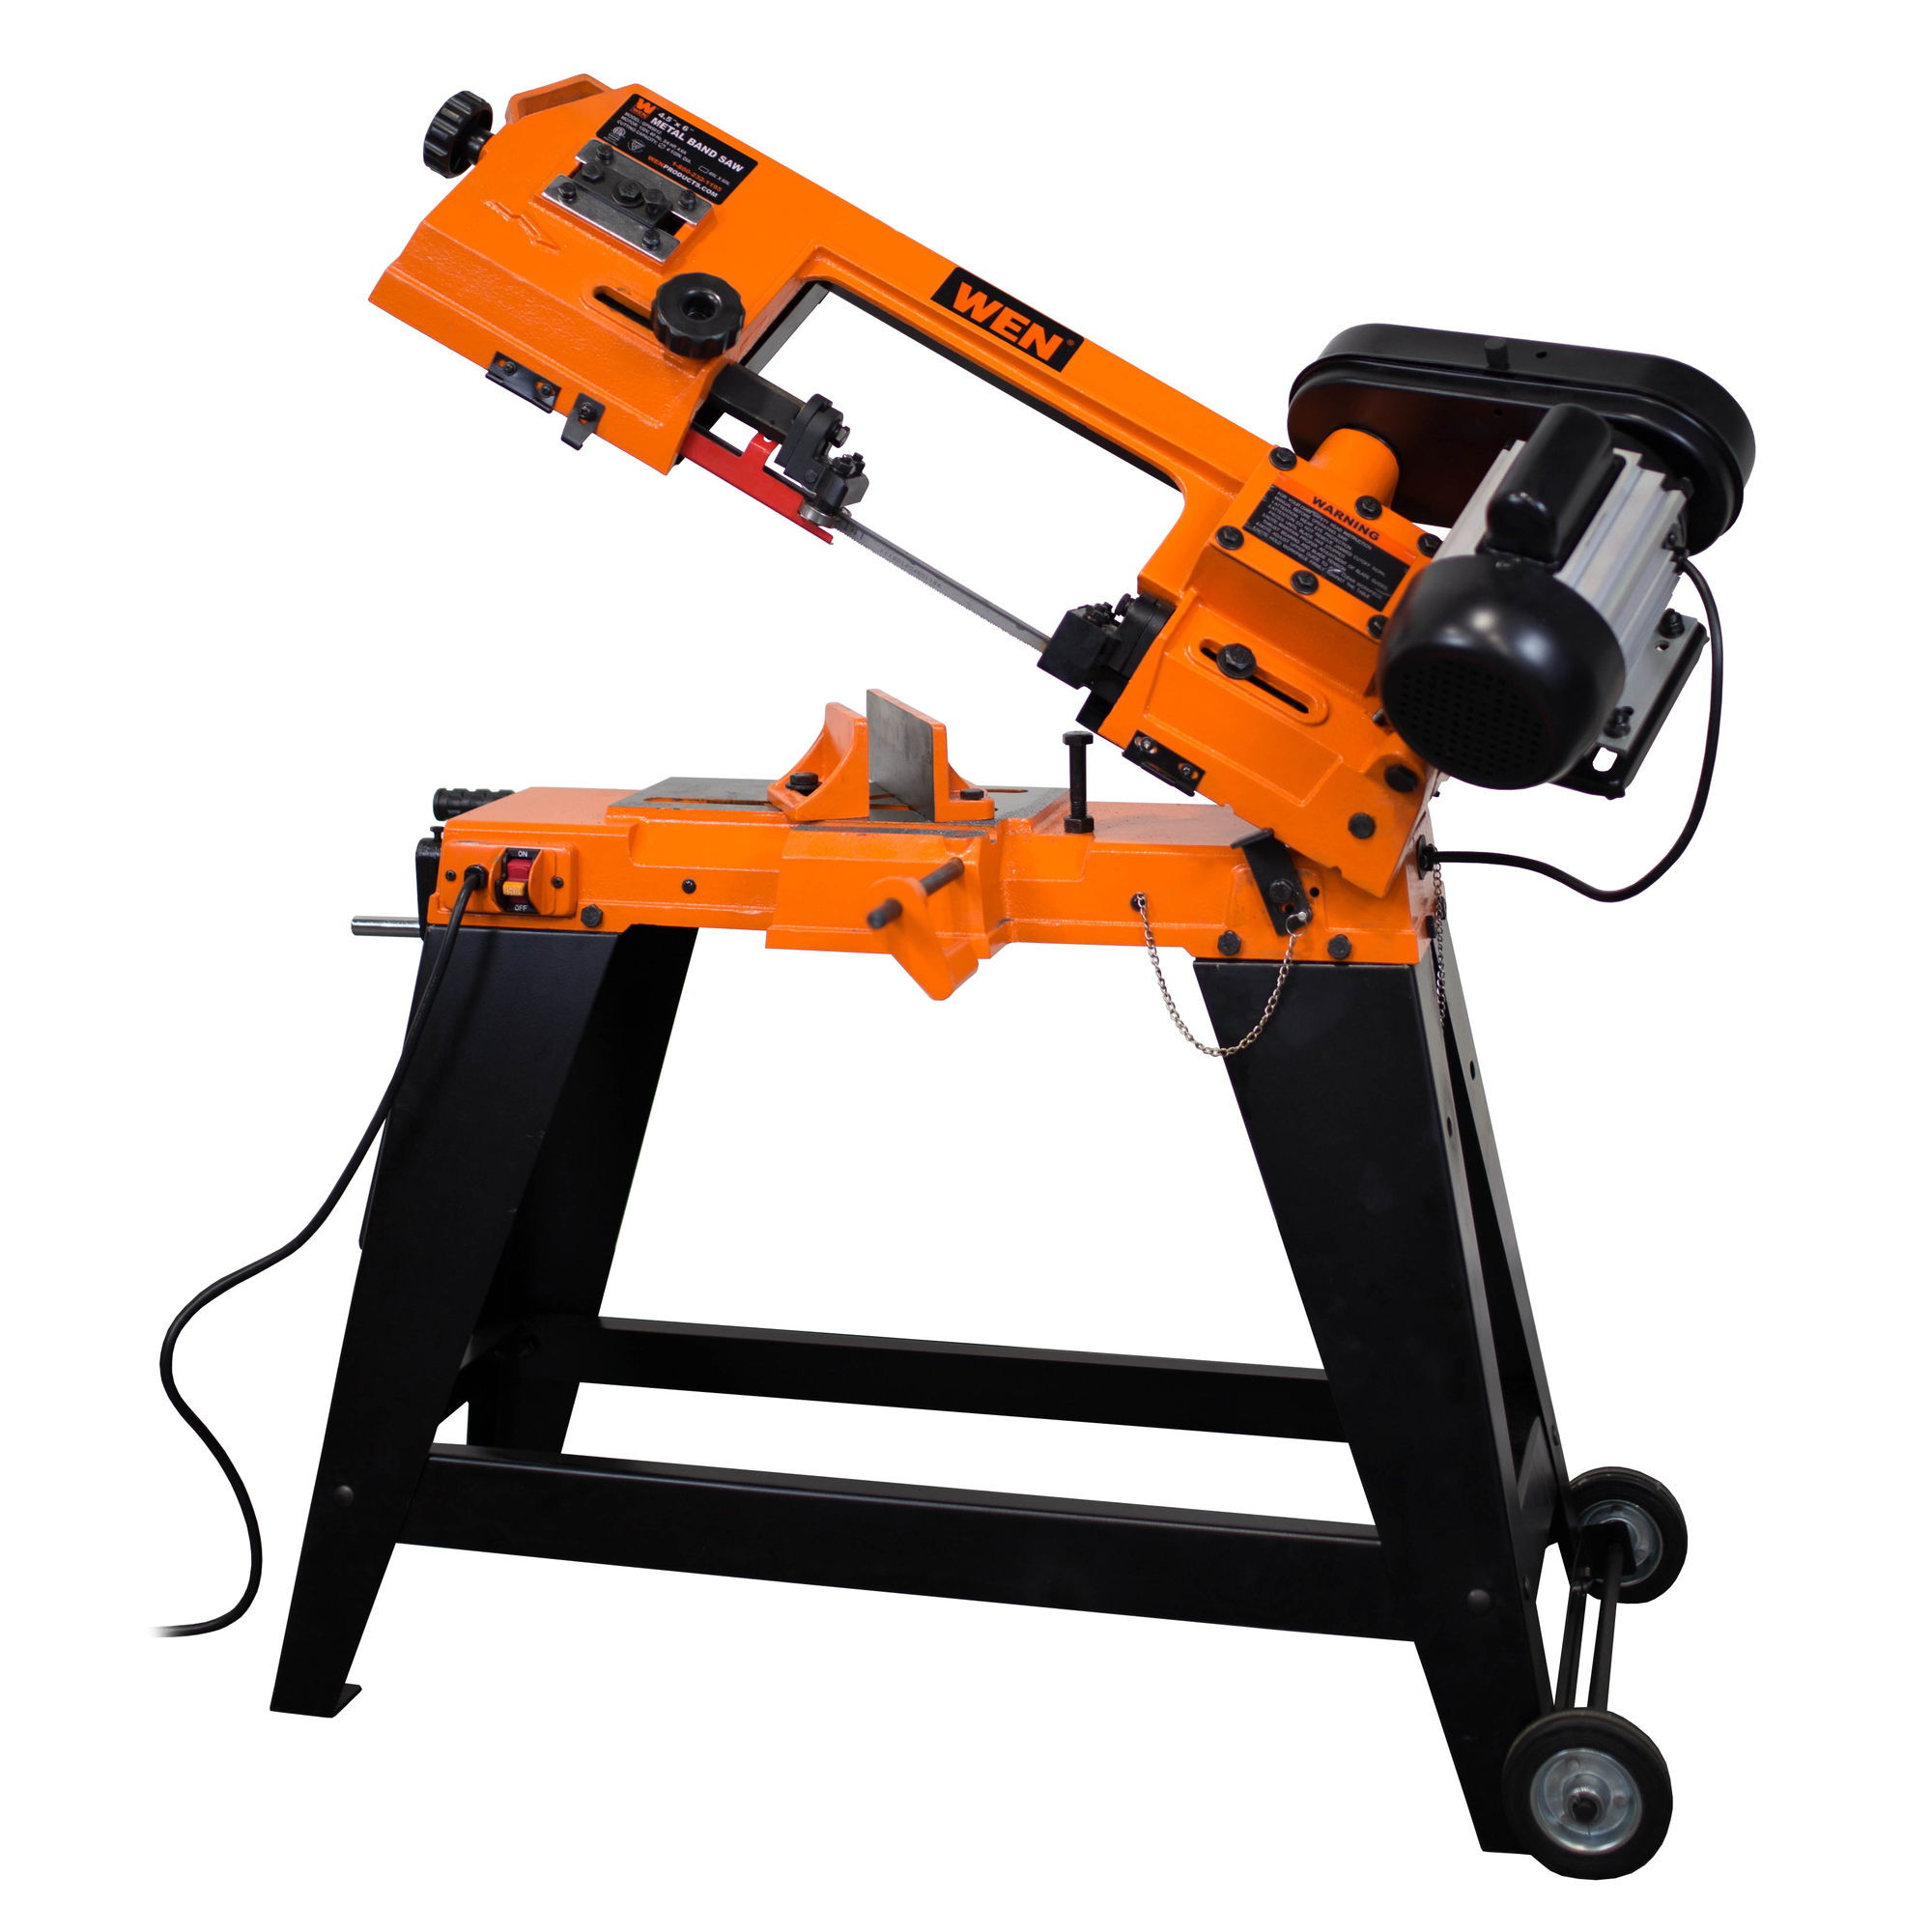 4-by-6Inch Metal-Cutting Band Saw with Stand, Volts 120, Power Type Corded, Model - WEN BA4664